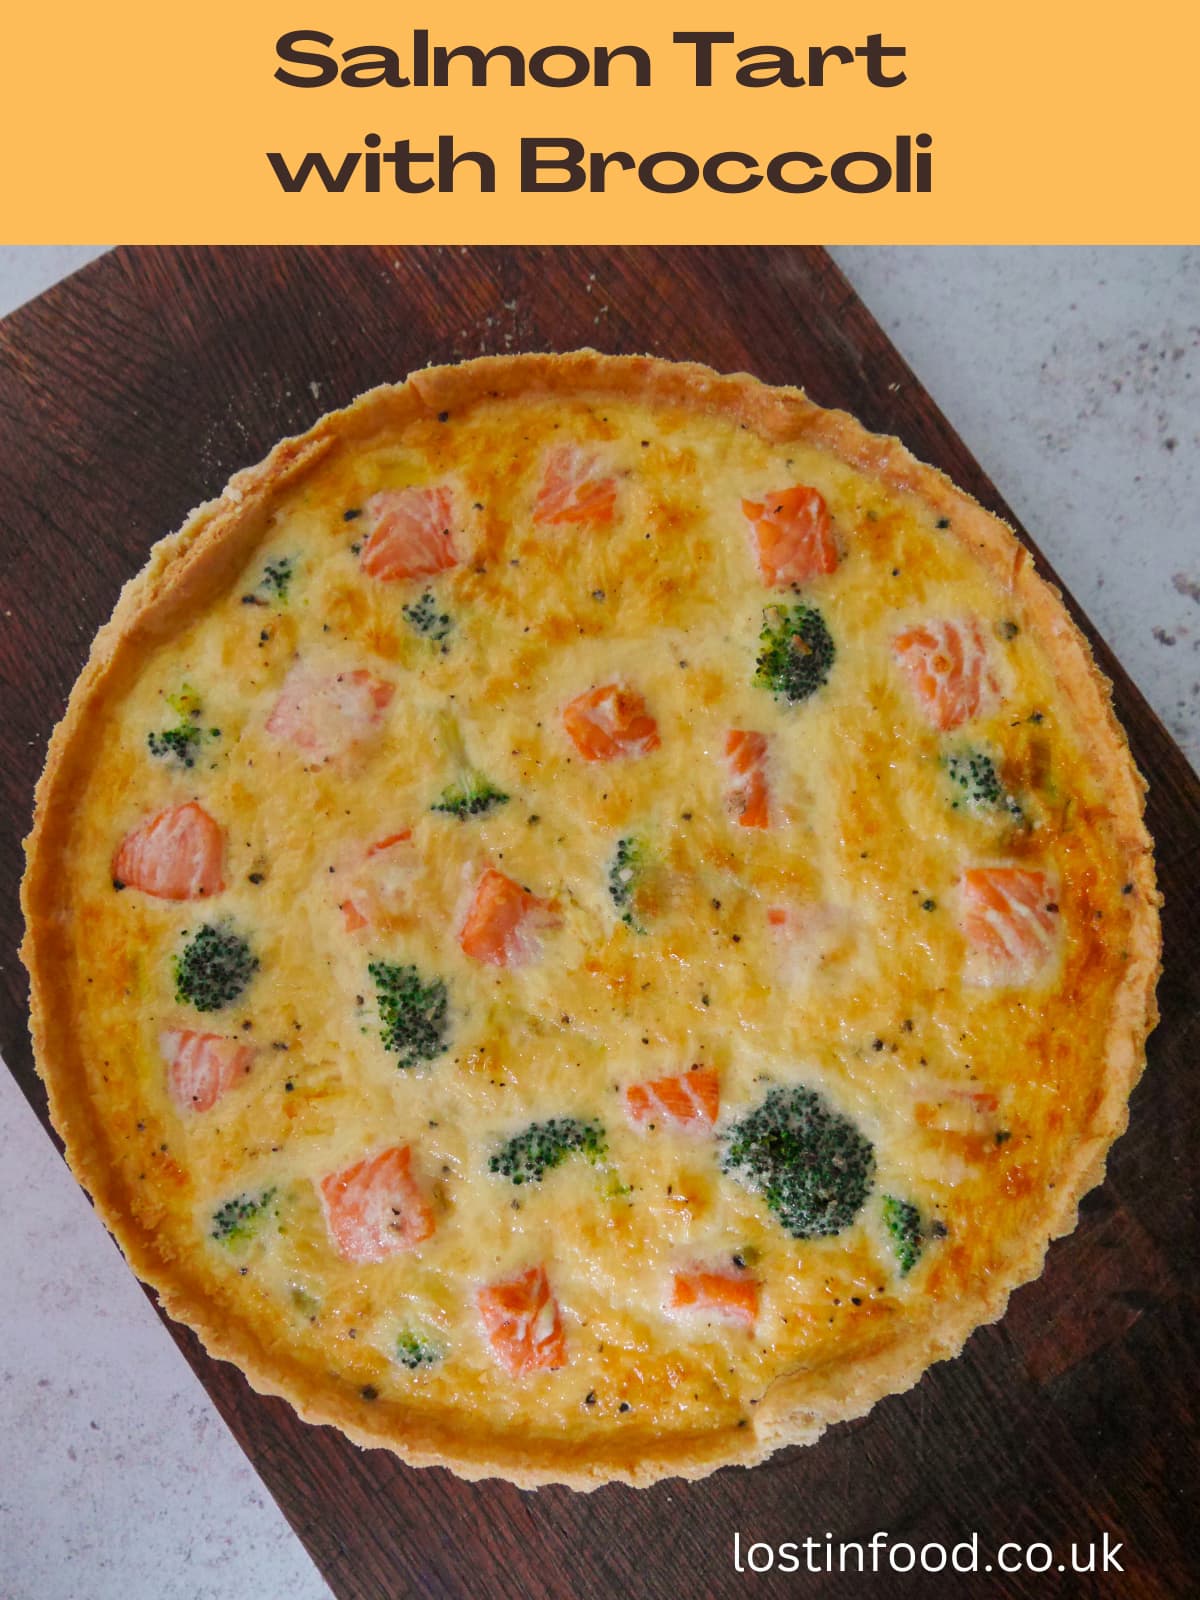 Pinnable image with recipe title and salmon tart with broccoli set on a wooden board.